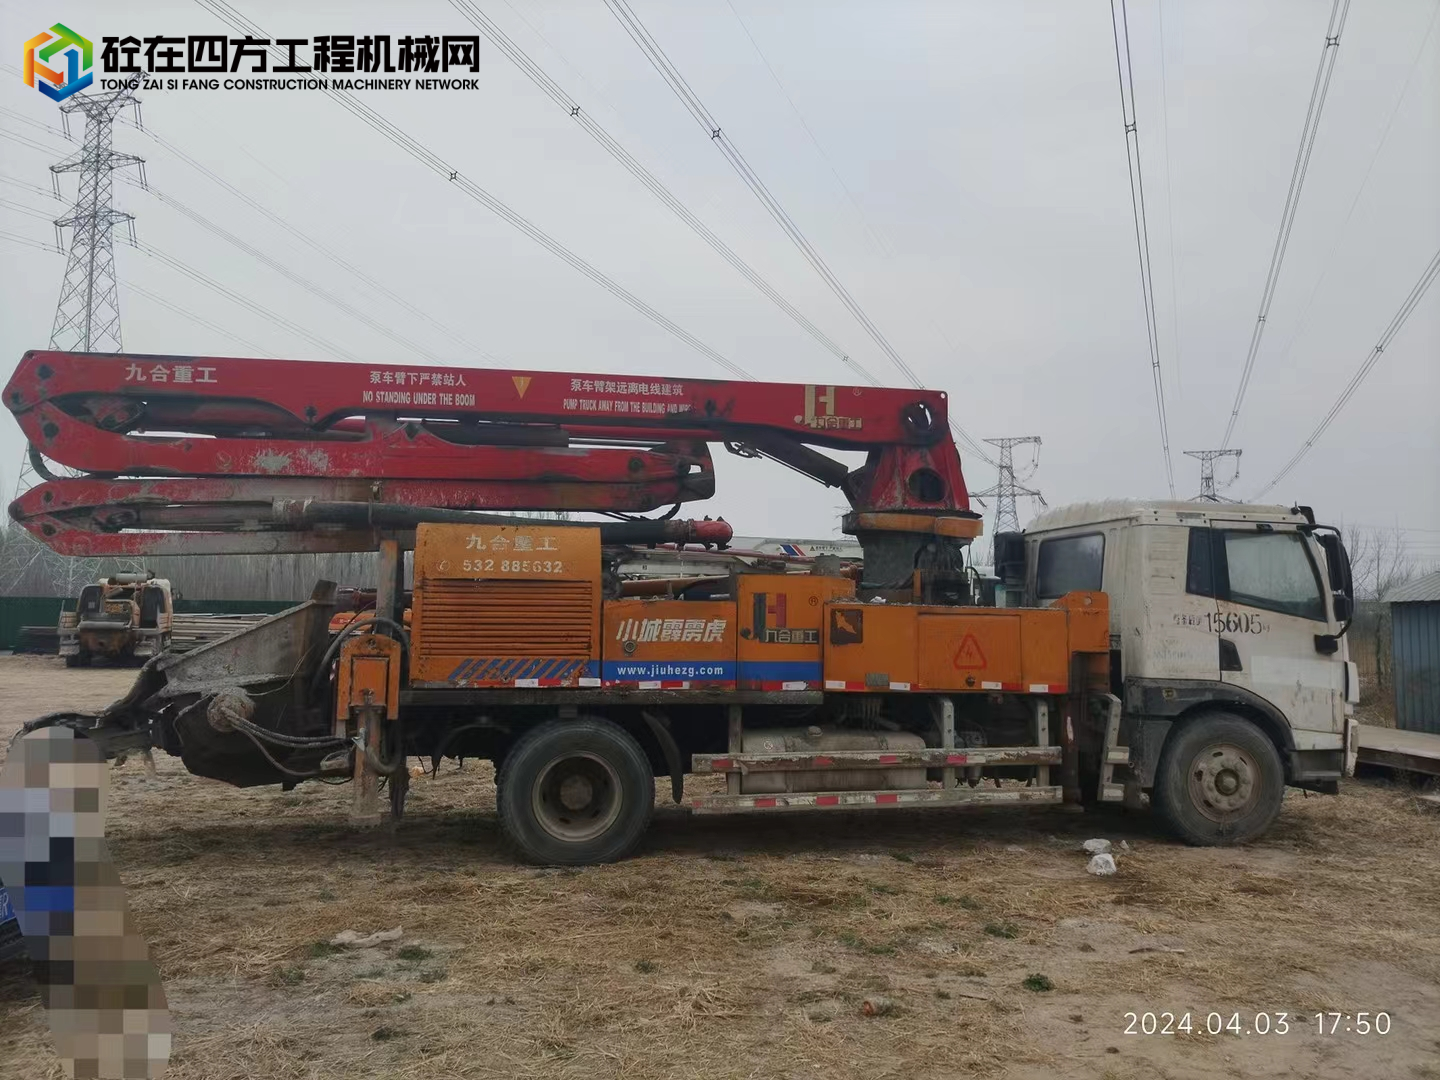 https://images.tongzsf.com/tong/truck_machine/20240410/166165a6558ad5.jpg